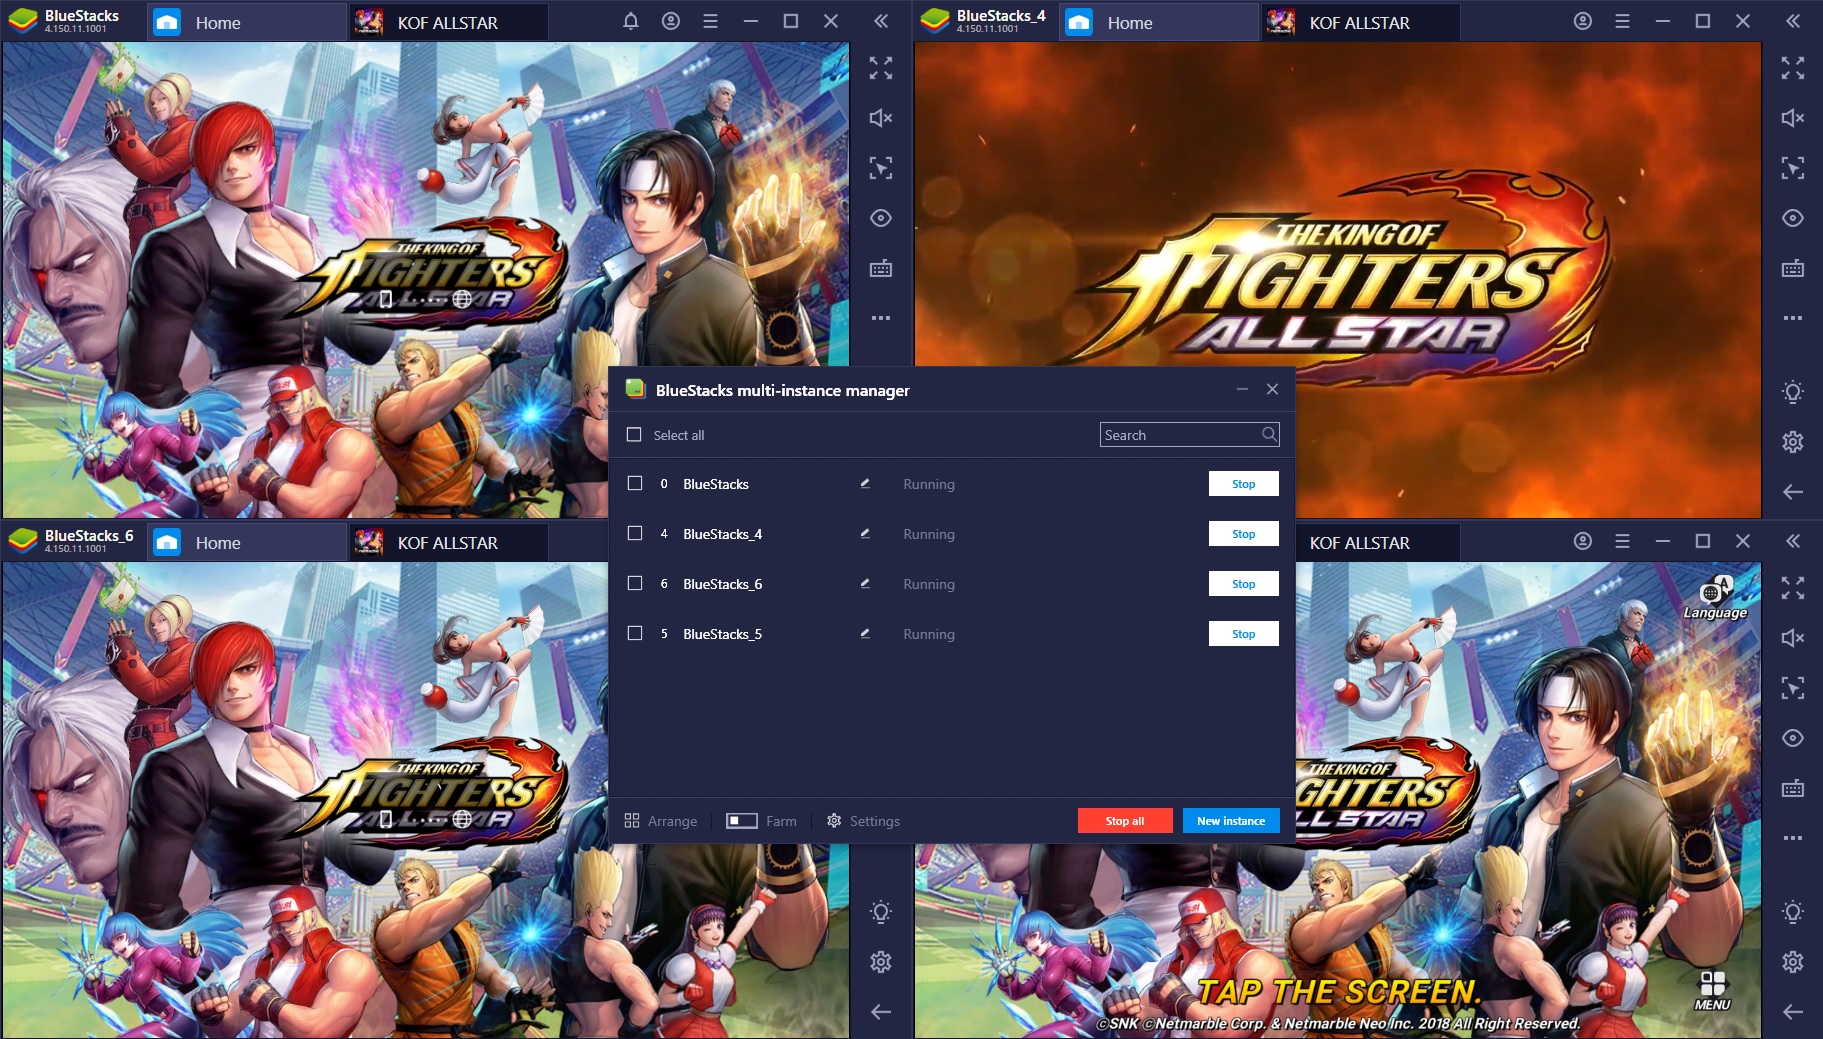 Why is there no Bluestacks multi-instance manager in Bluestacks? :  r/BlueStacks